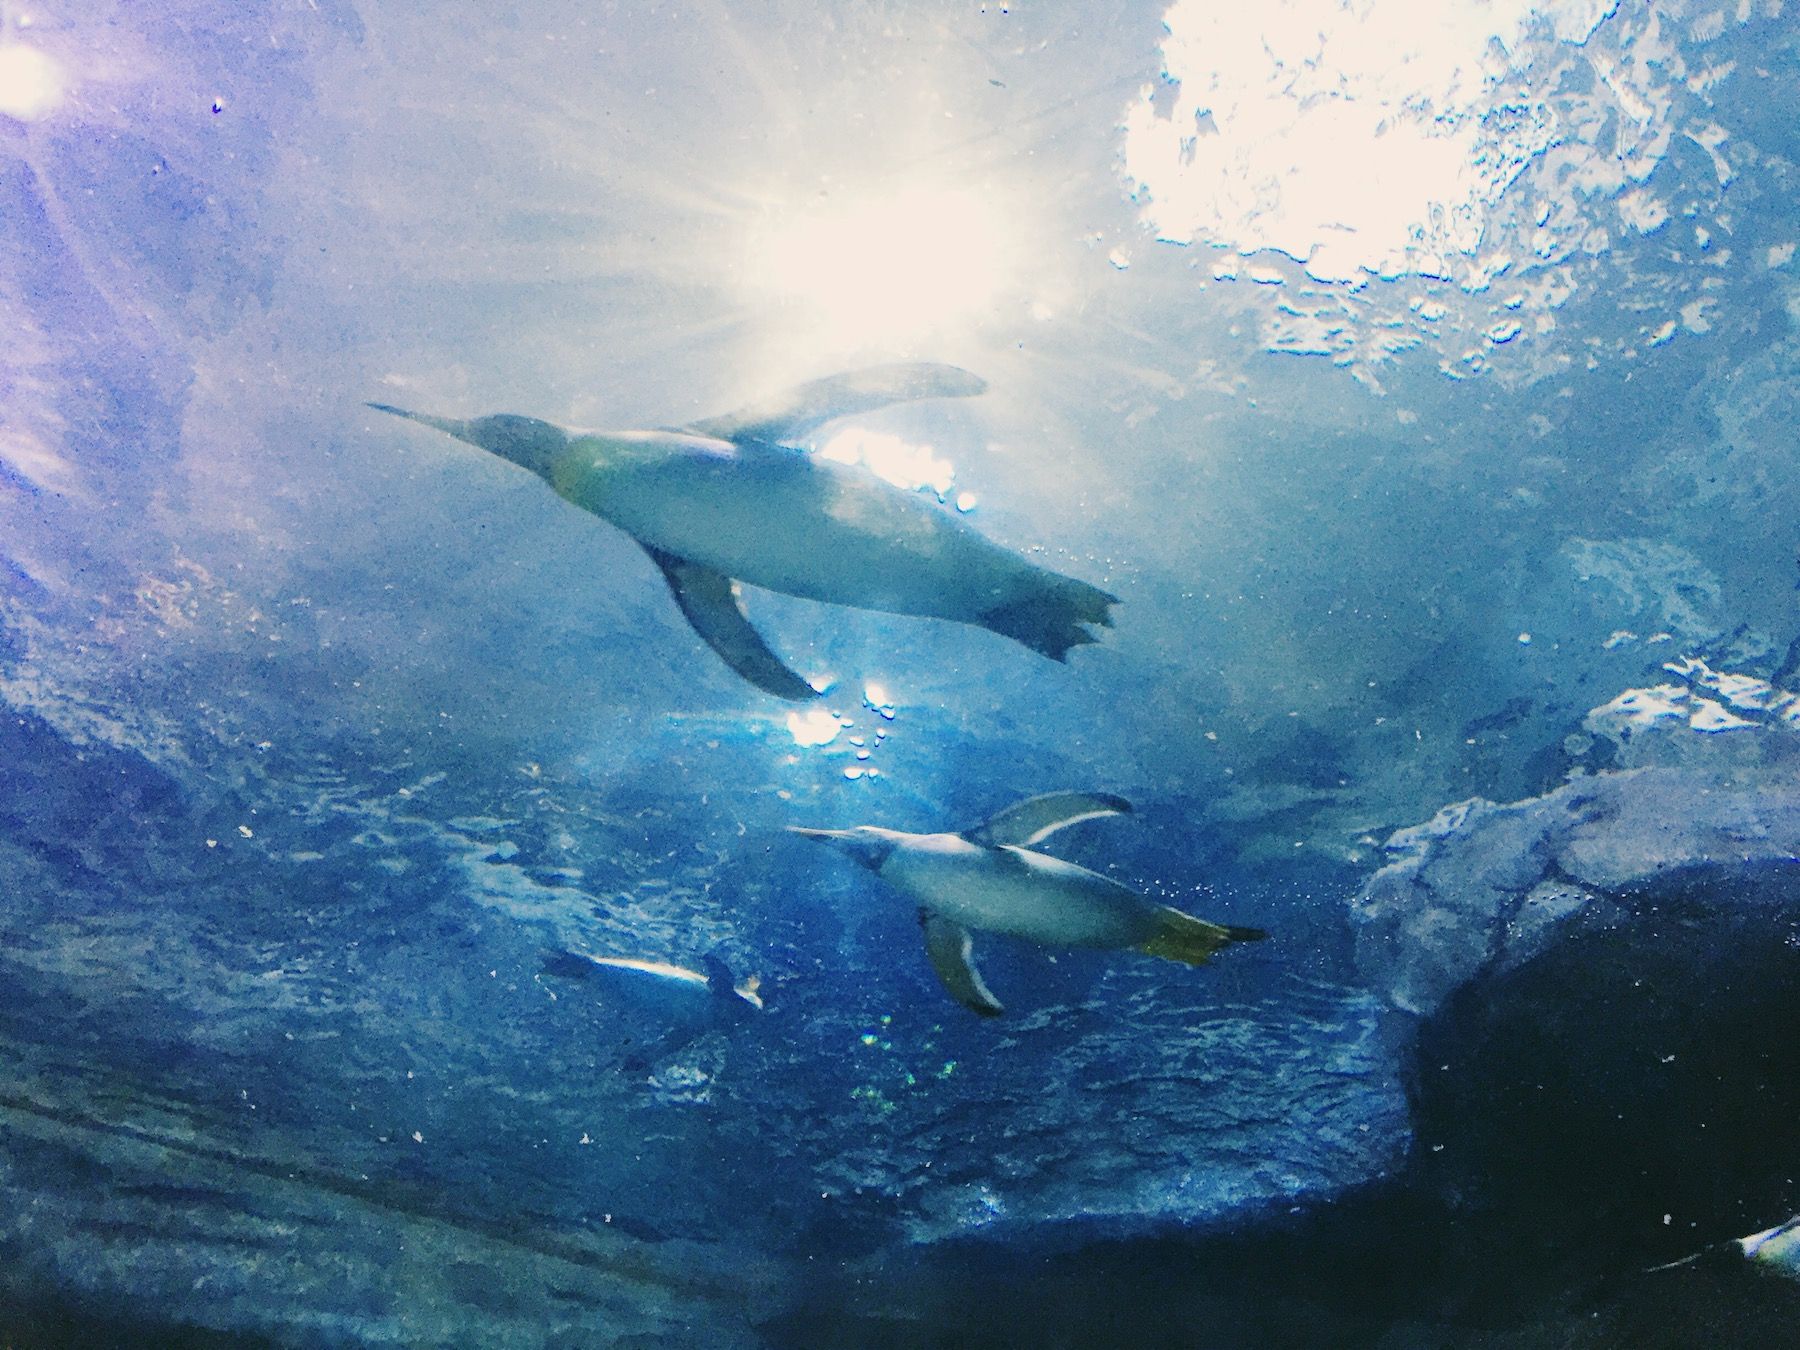 Penguins swimming, flare from sun through water.